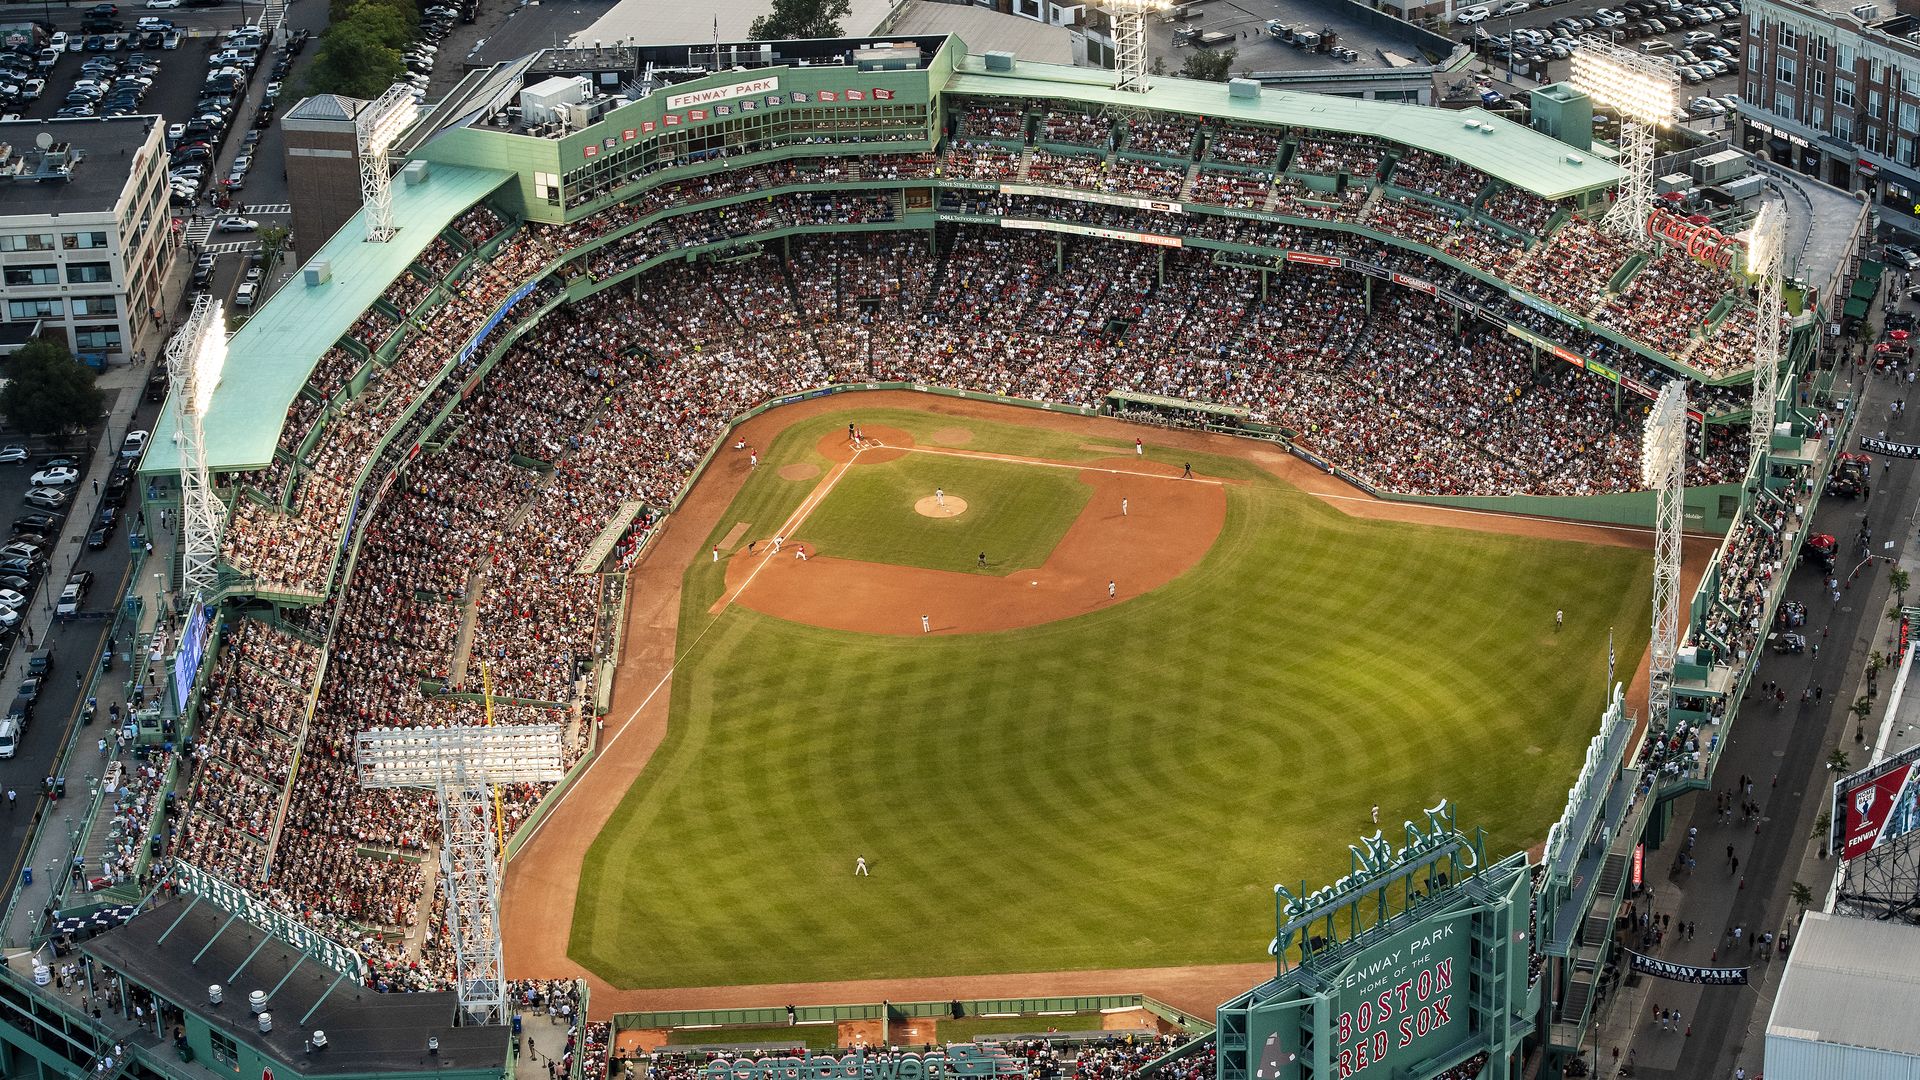 An aerial view of Fenway Park during a game between the Boston Red Sox and the New York Yankees on August 3, 2018 at Fenway Park in Boston, Massachusetts.